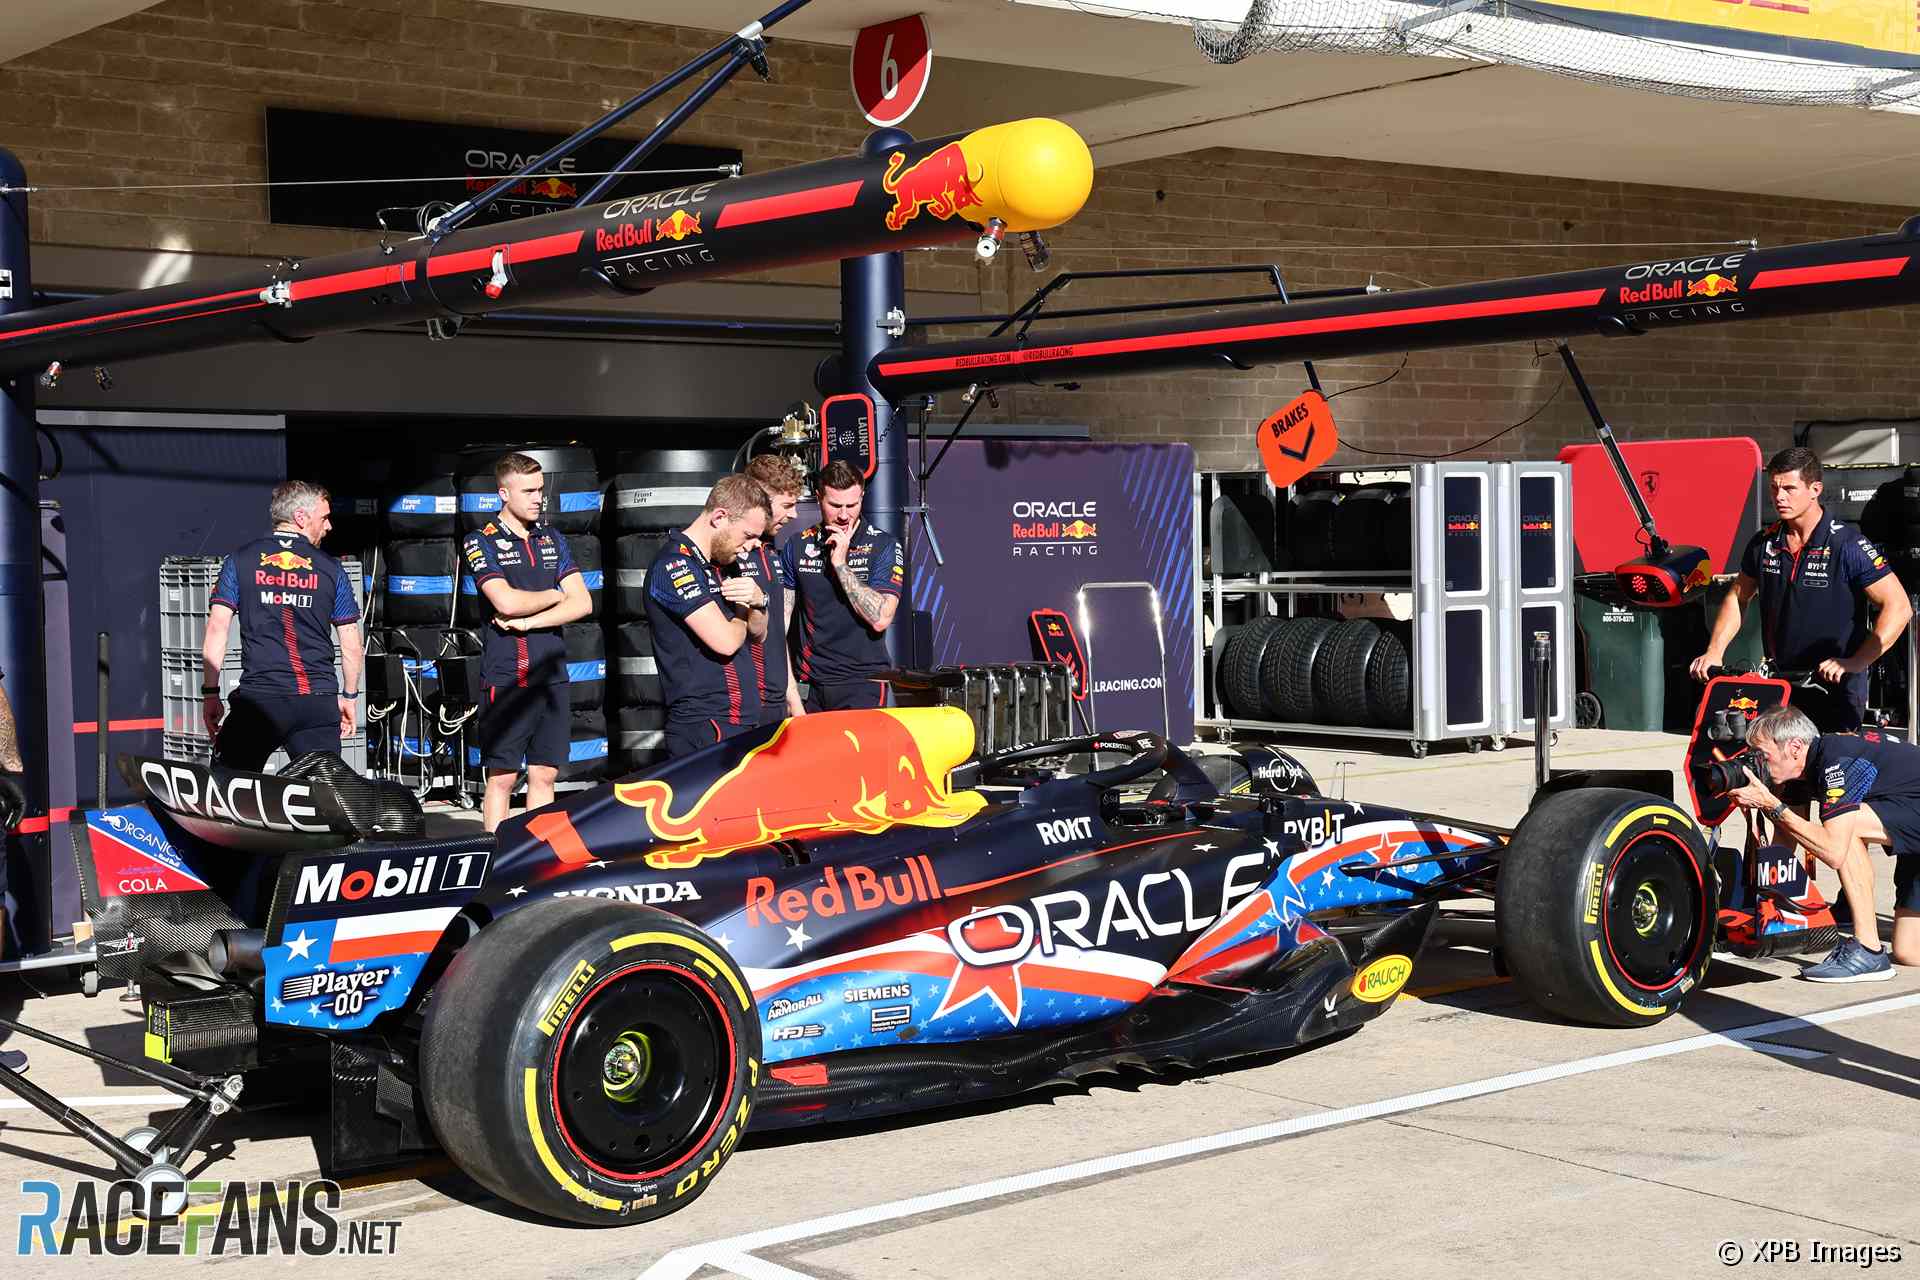 Red Bull United States Grand Prix livery, Circuit of the Americas, 2023